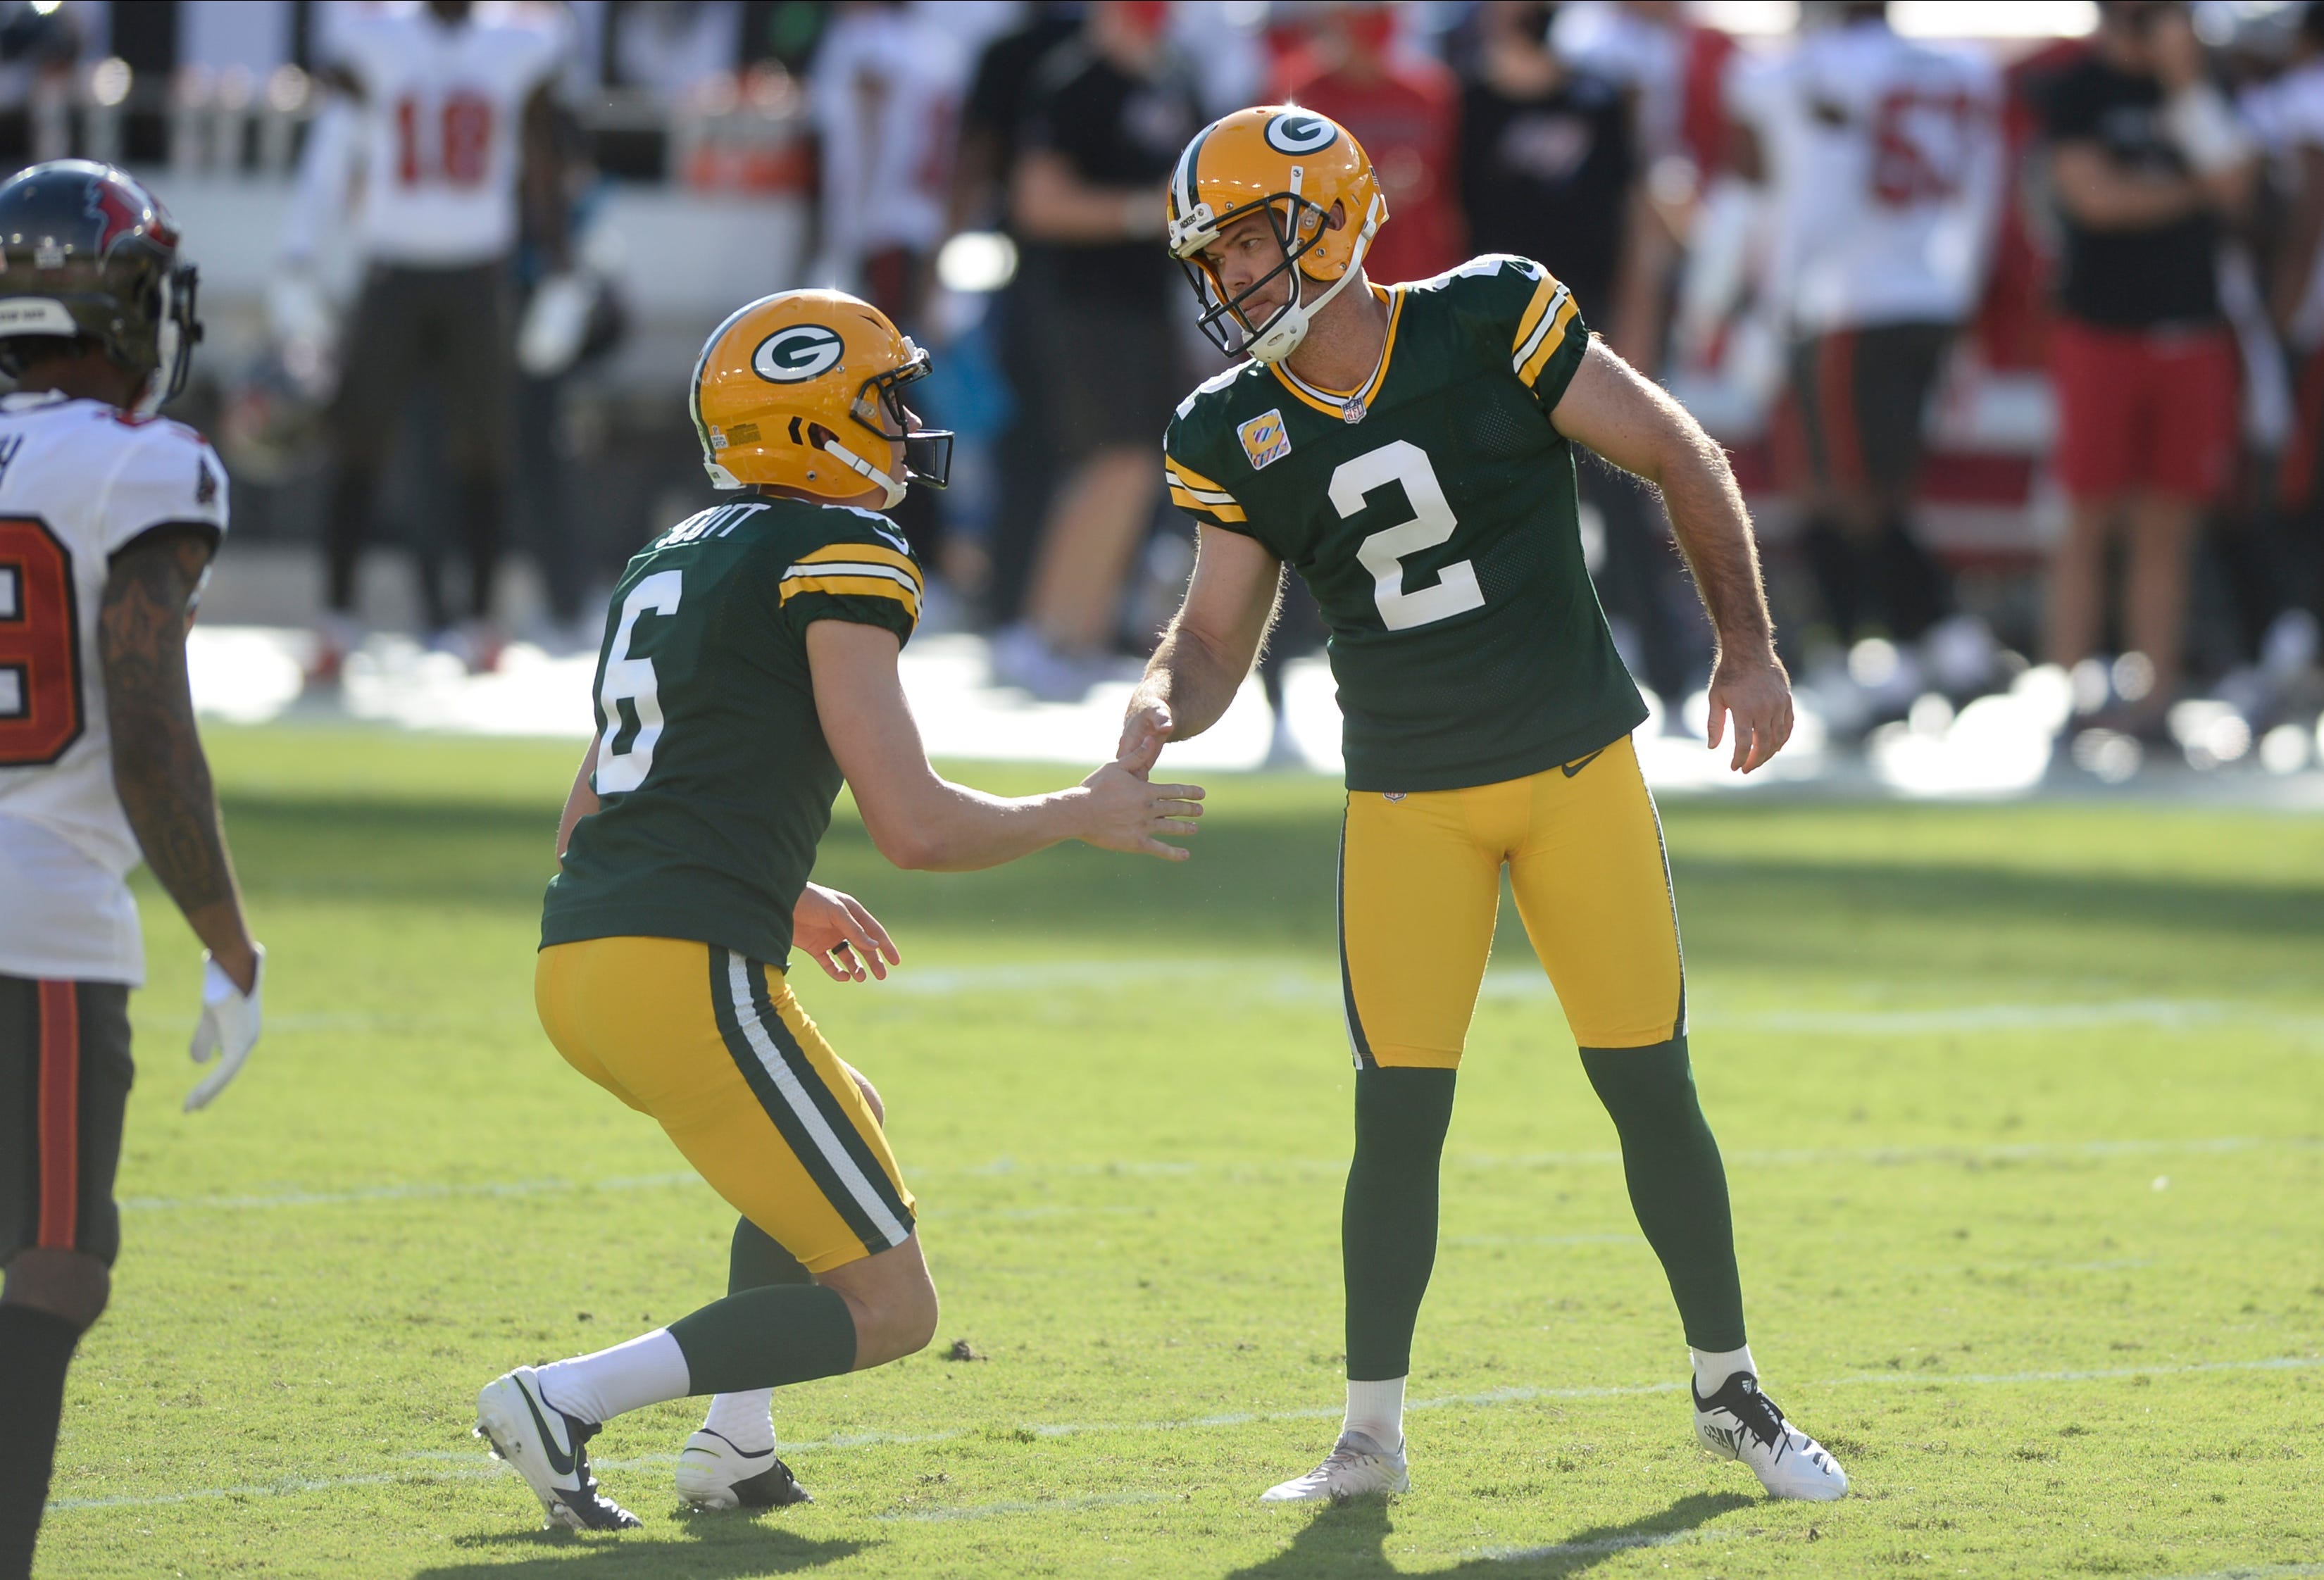 Green Bay Packers' Mason Crosby (2) celebrates with J.K. Scott (6) after kicking a field goal against the Tampa Bay Buccaneers during the first half of an NFL football game Sunday, Oct. 18, 2020, in Tampa, Fla.